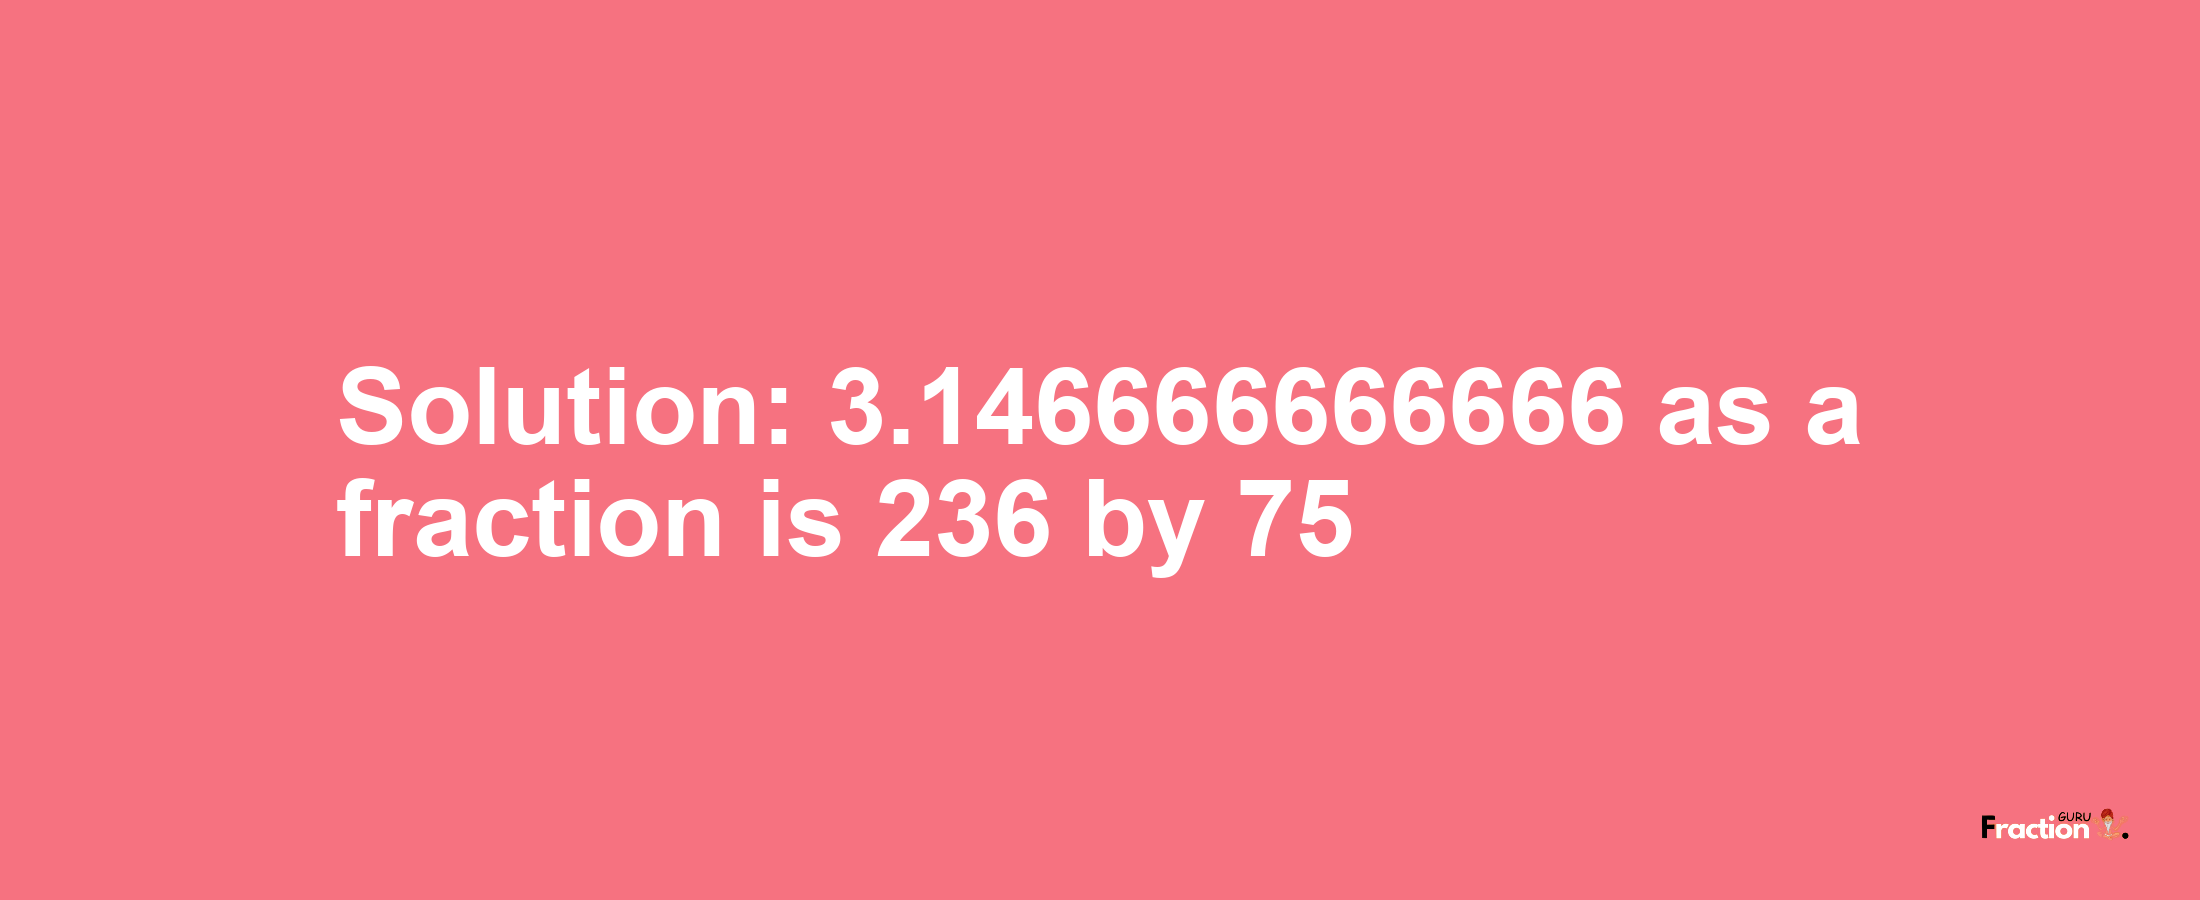 Solution:3.146666666666 as a fraction is 236/75